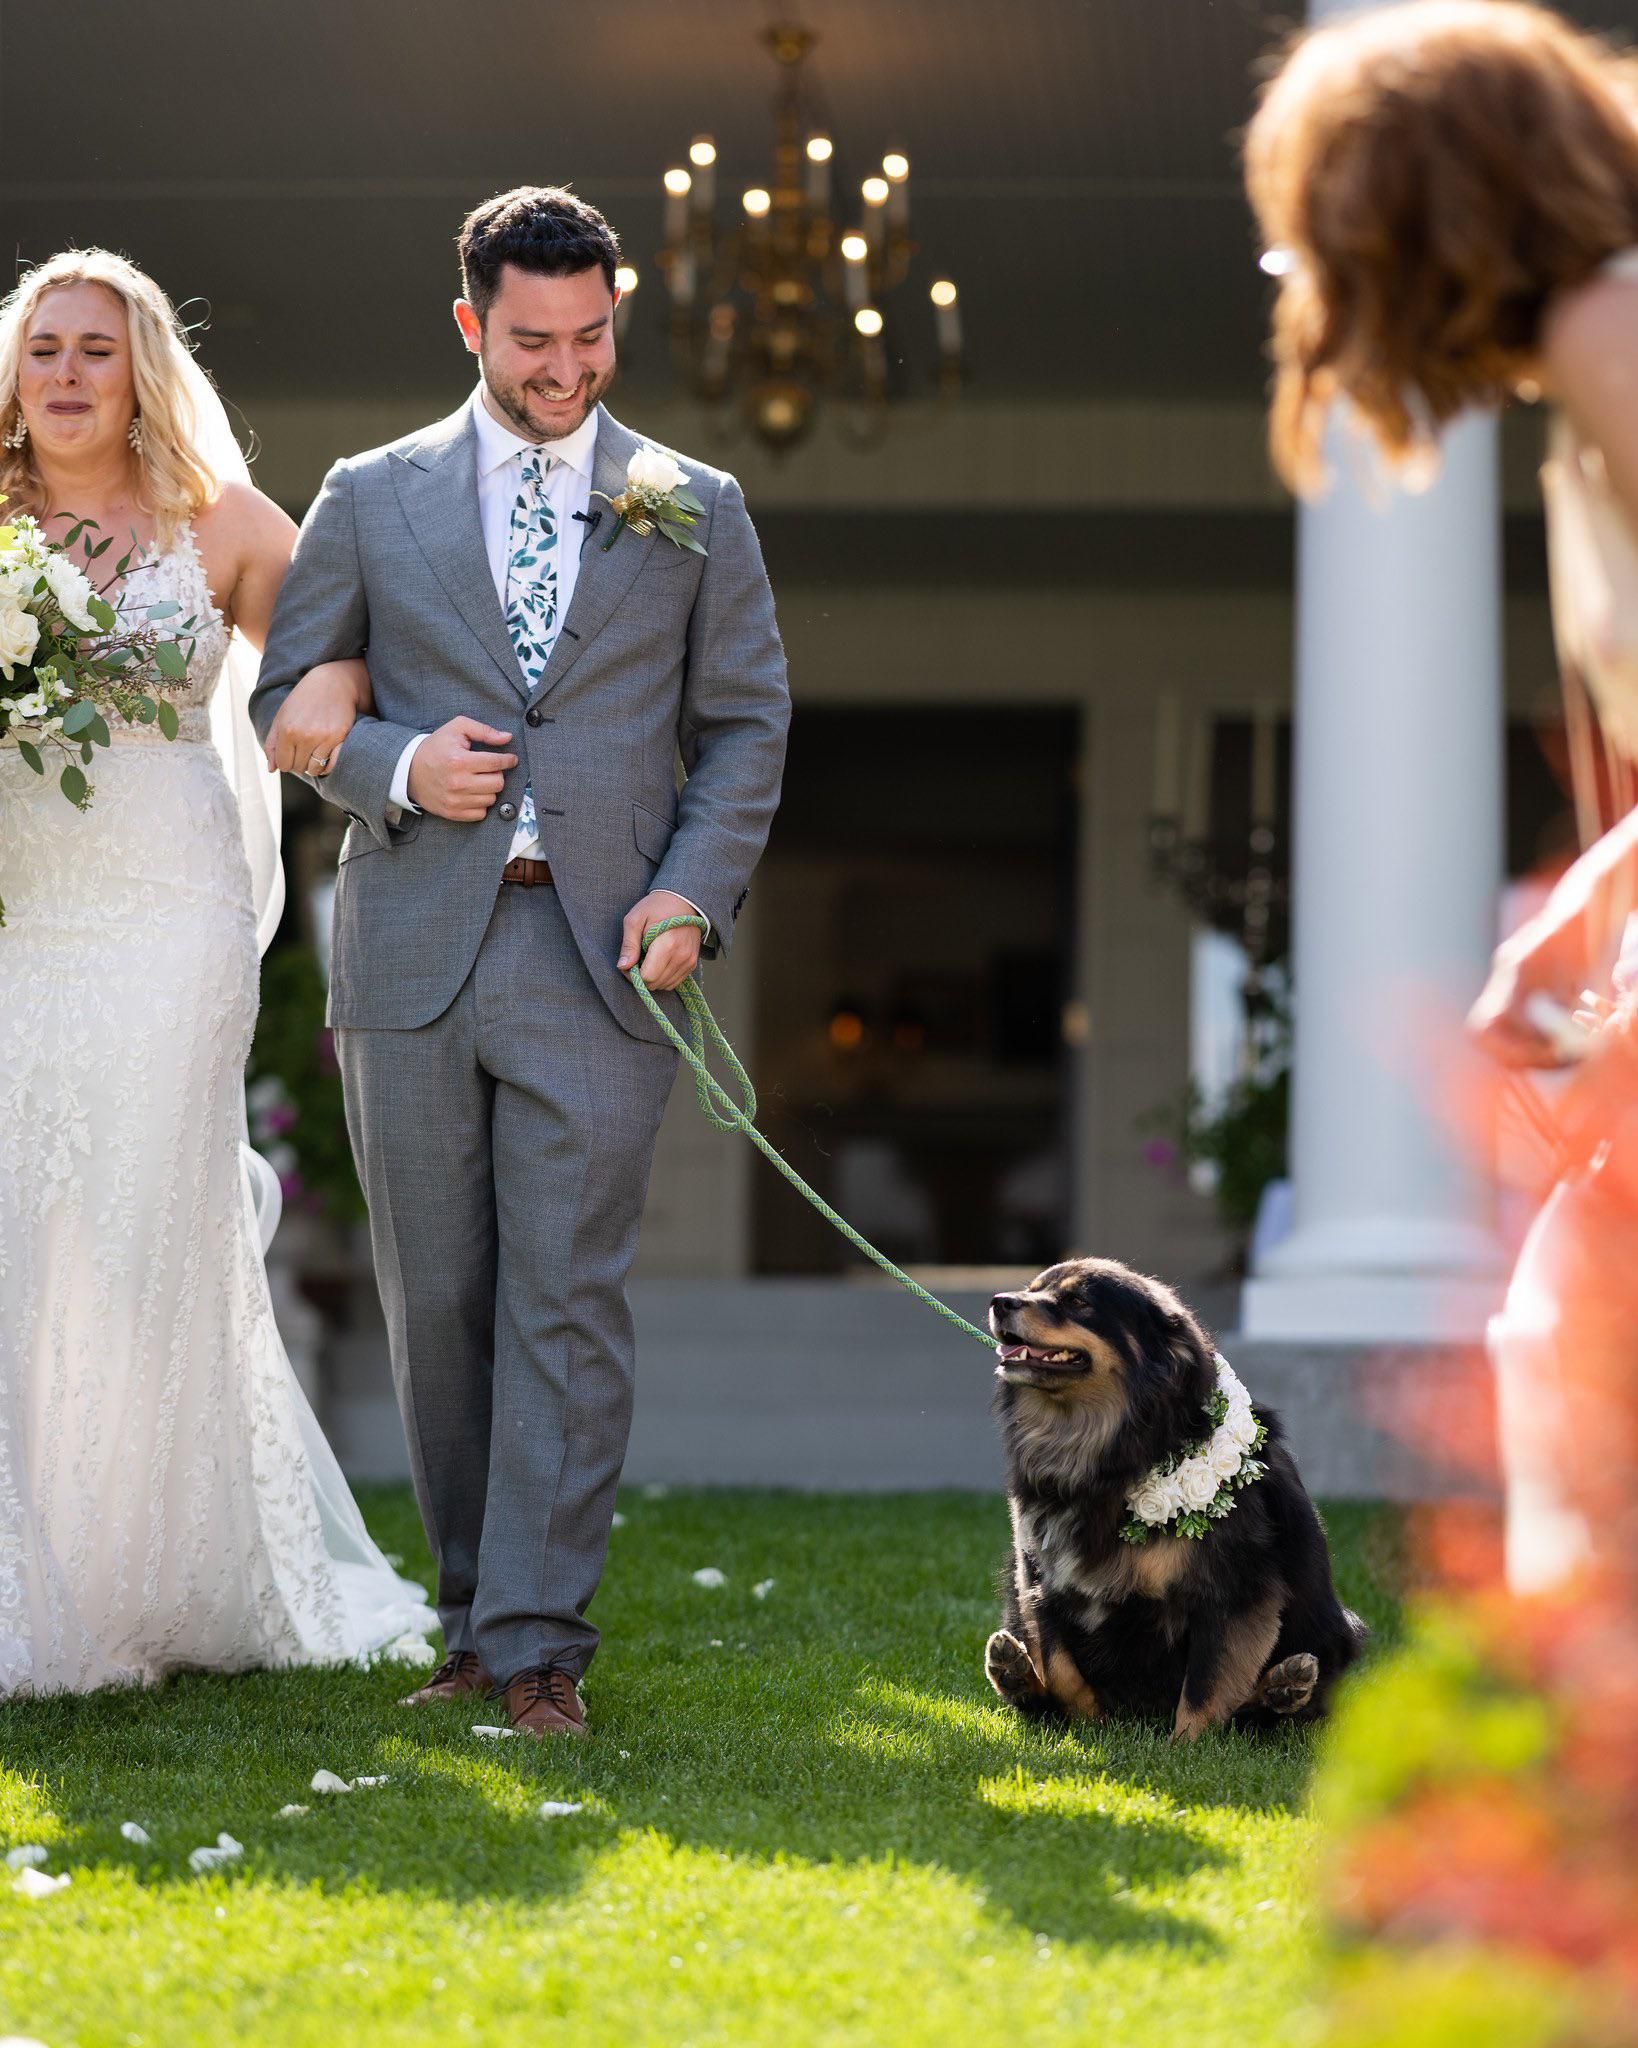 Got married last week, our dog decided to steal the show by scooting his butt down the isle